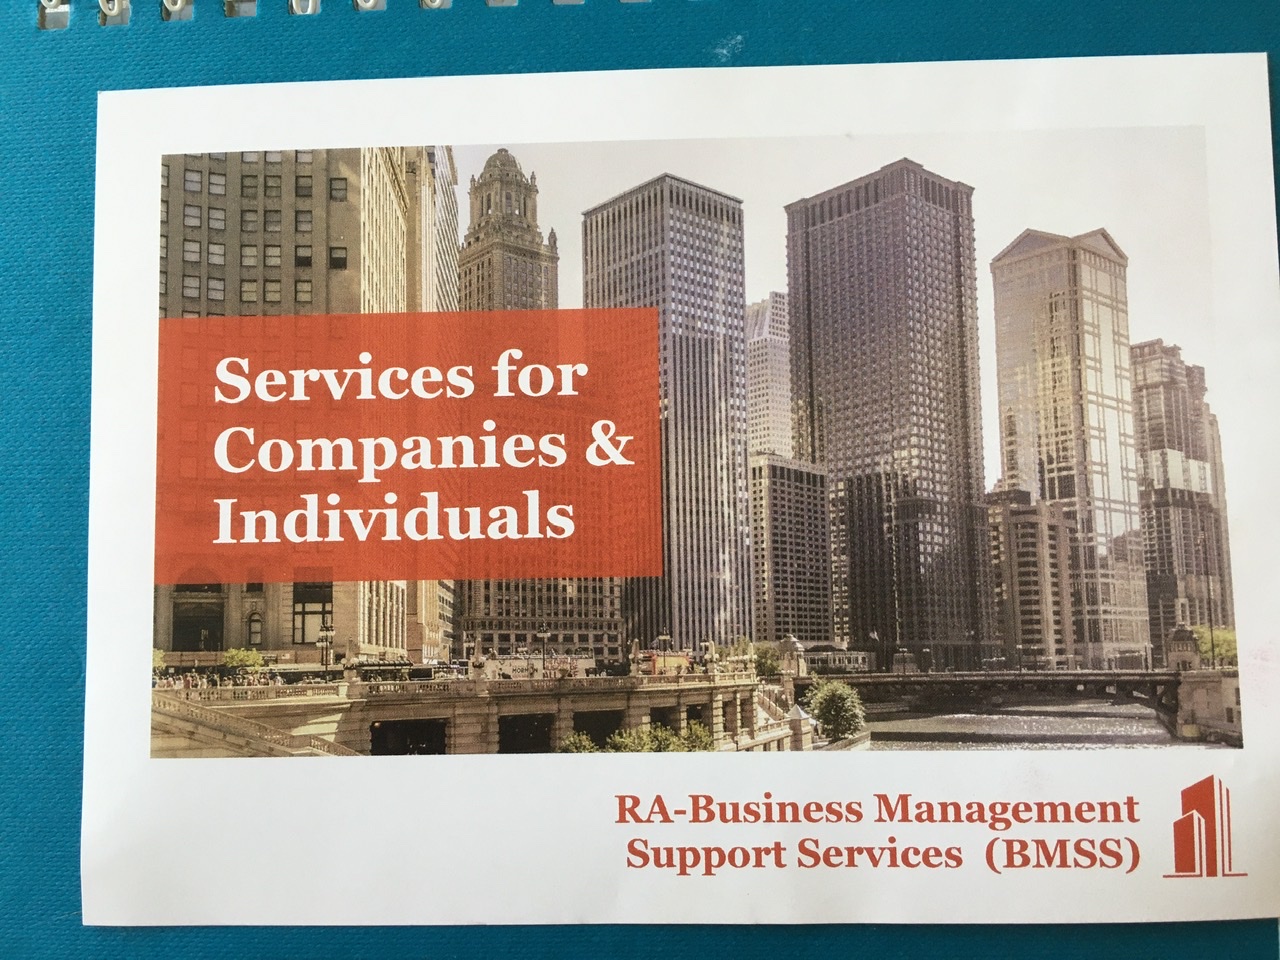 RA-Business Management Support Services